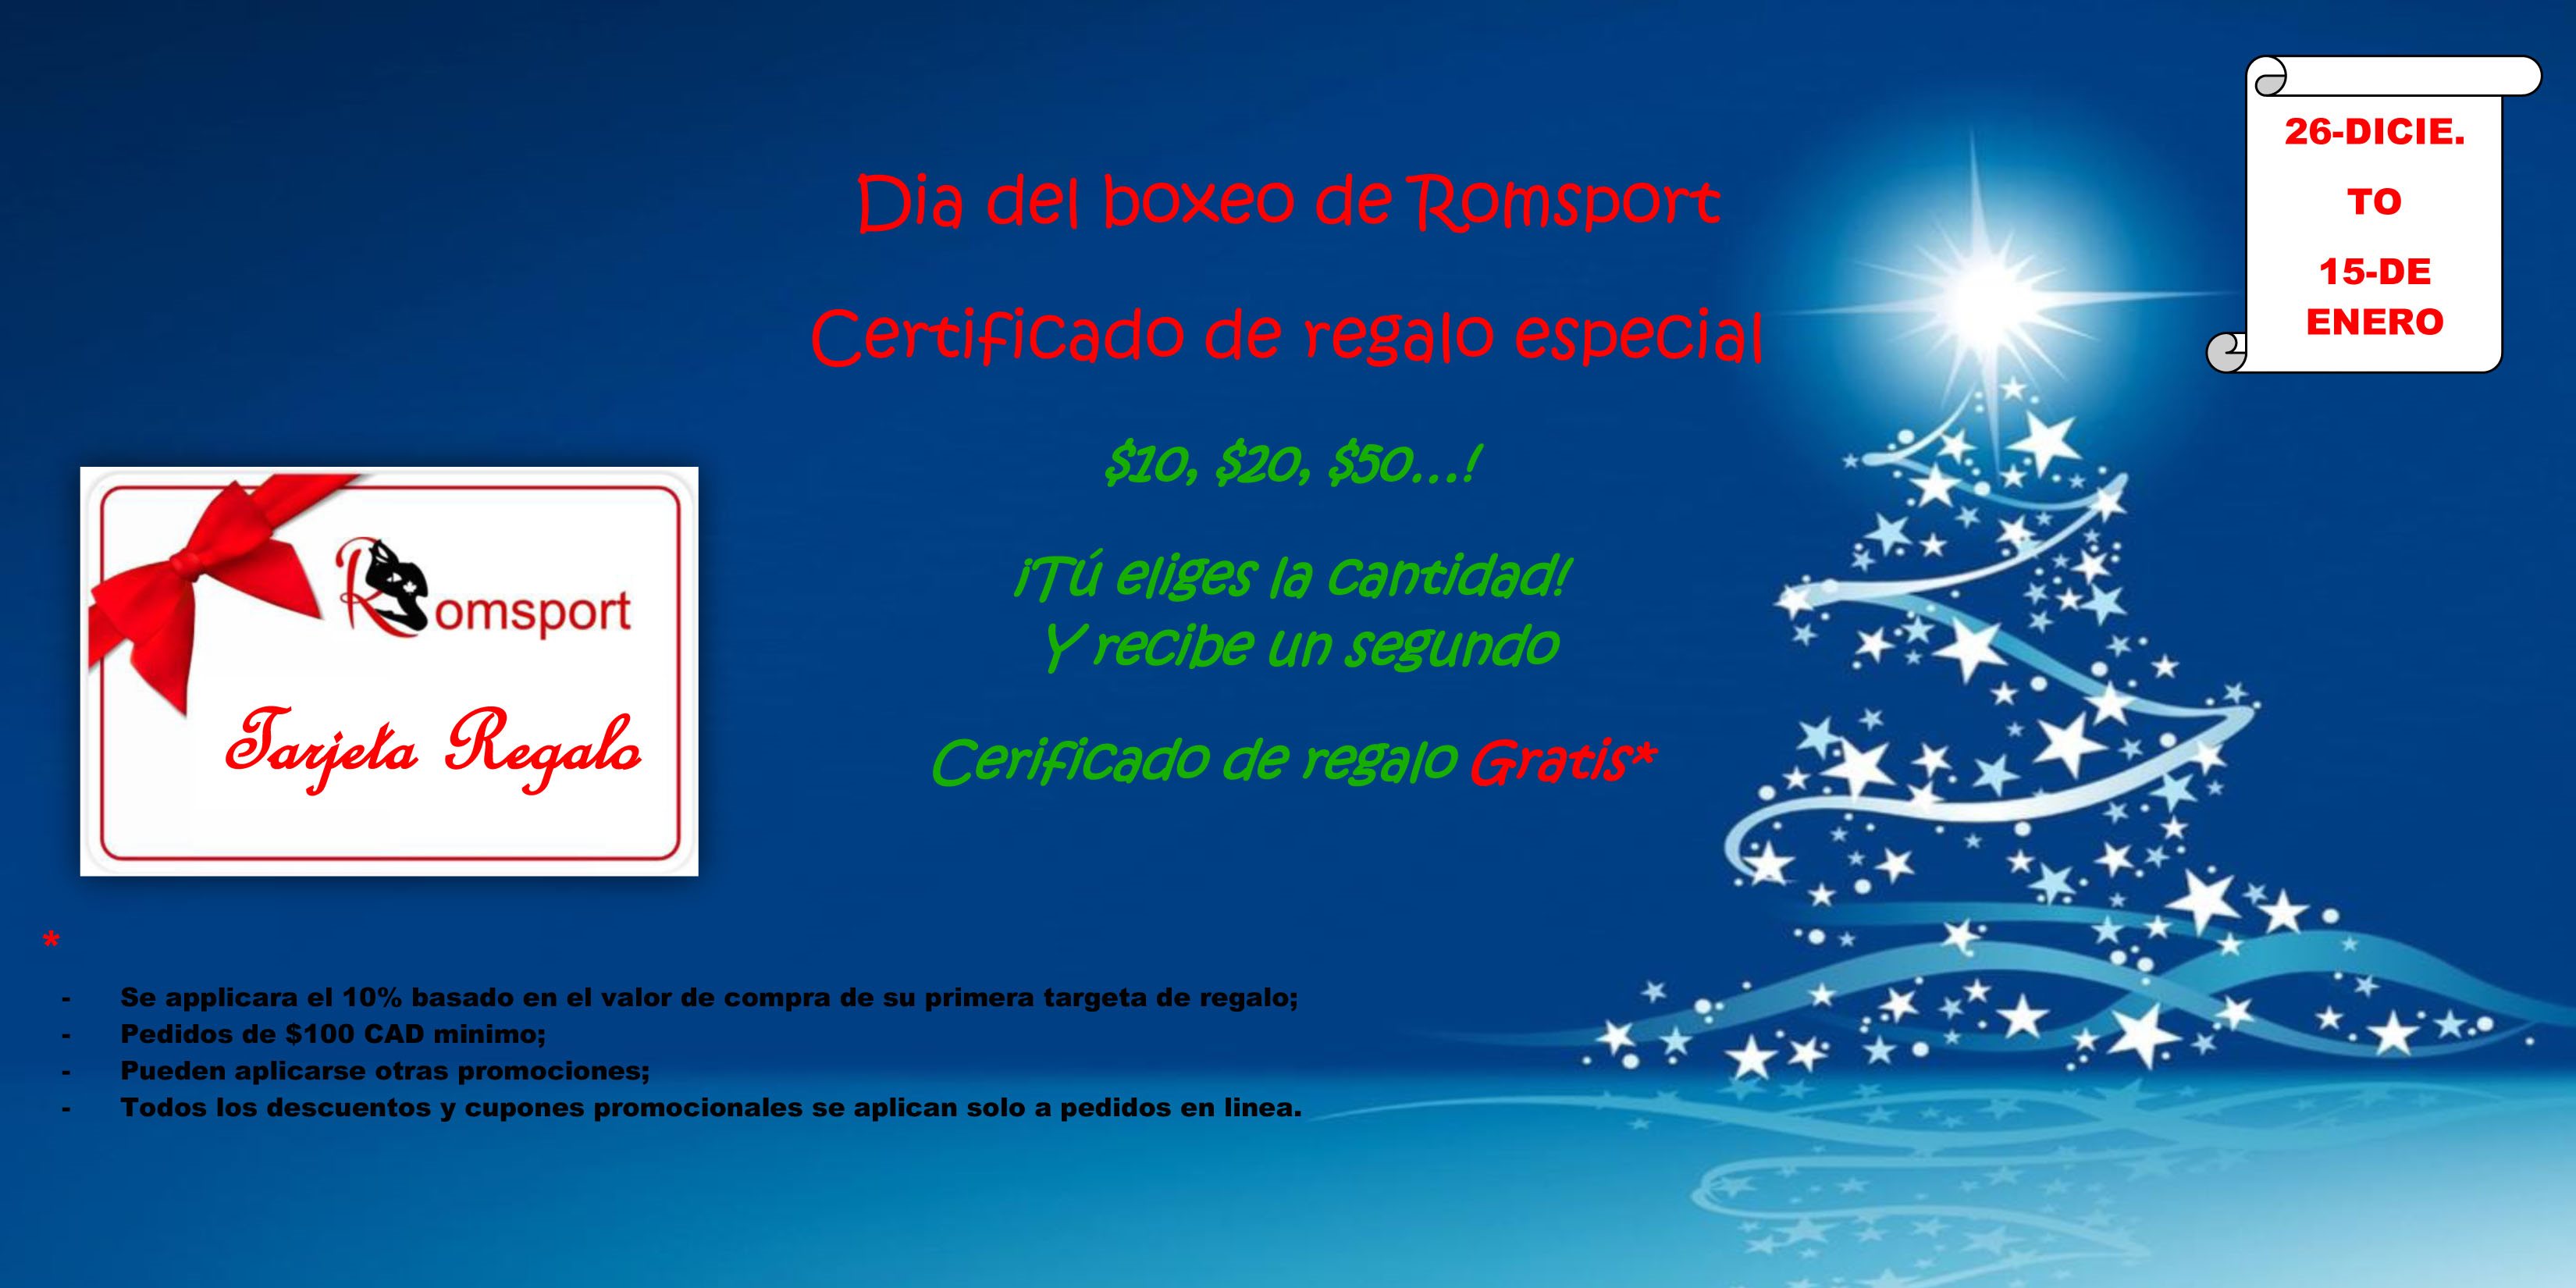 Boxing day gift card promotion 2019_es